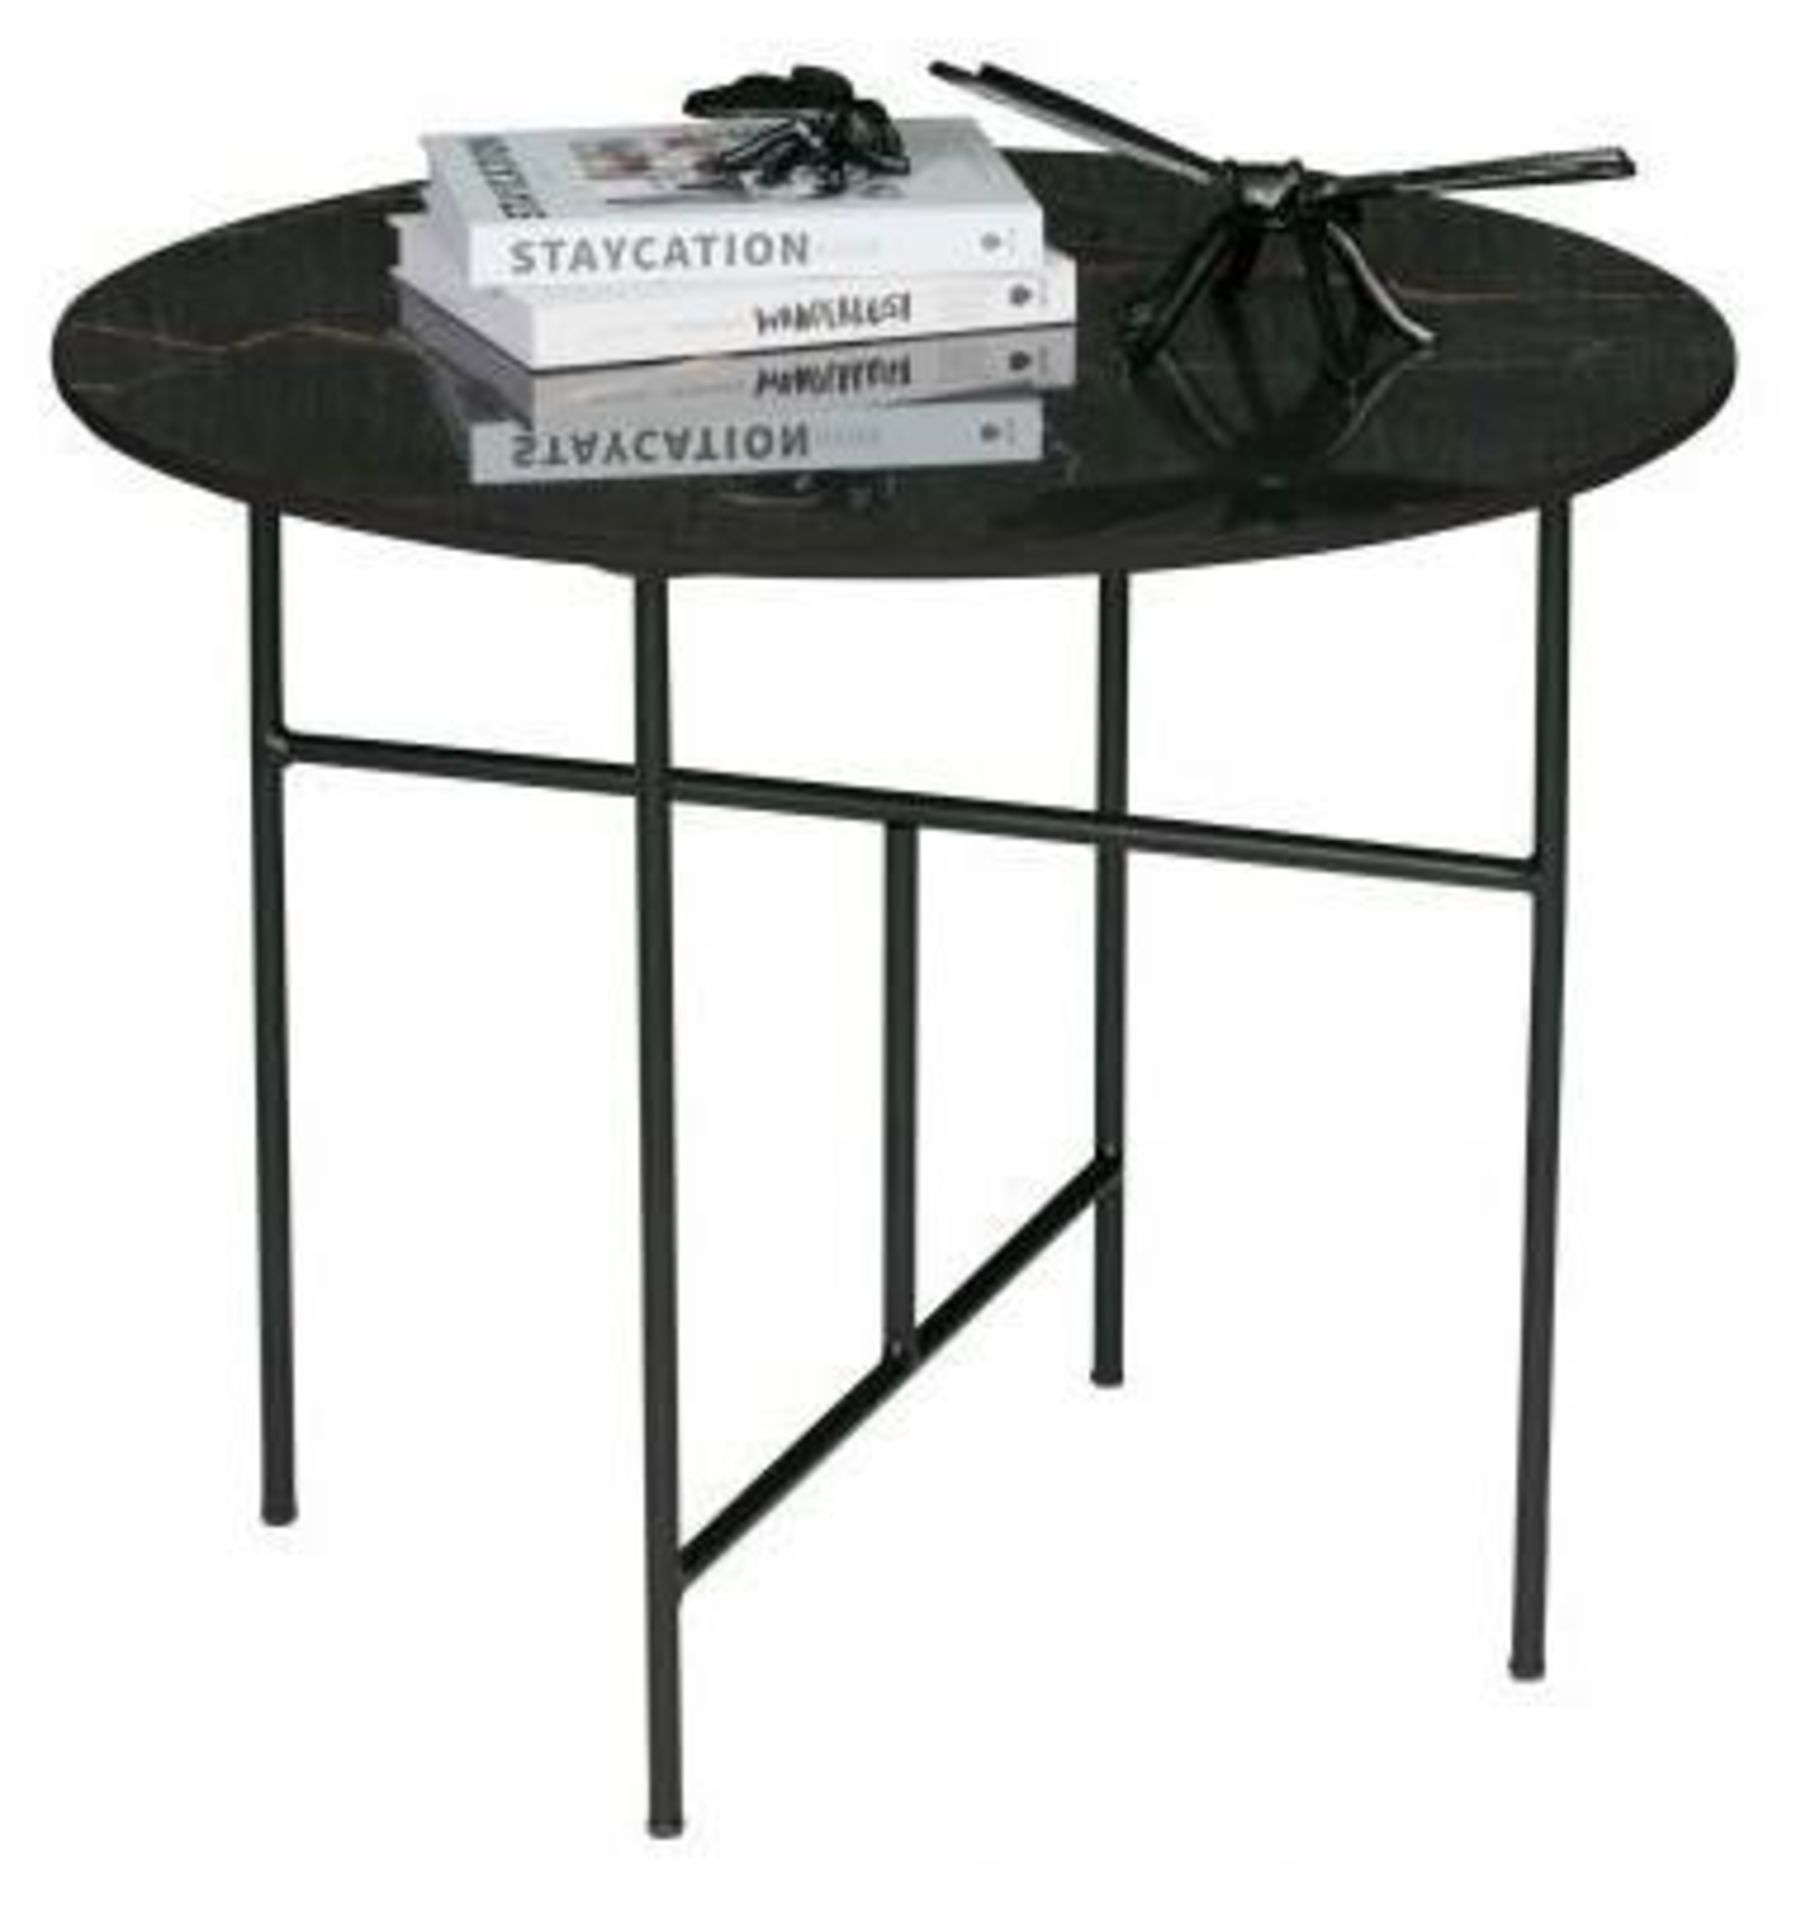 1 x VIDA Modern Round Coffee Table Featuring A Black Marbled Porcelain Tabletop - Produced By WOOOD - Image 4 of 4